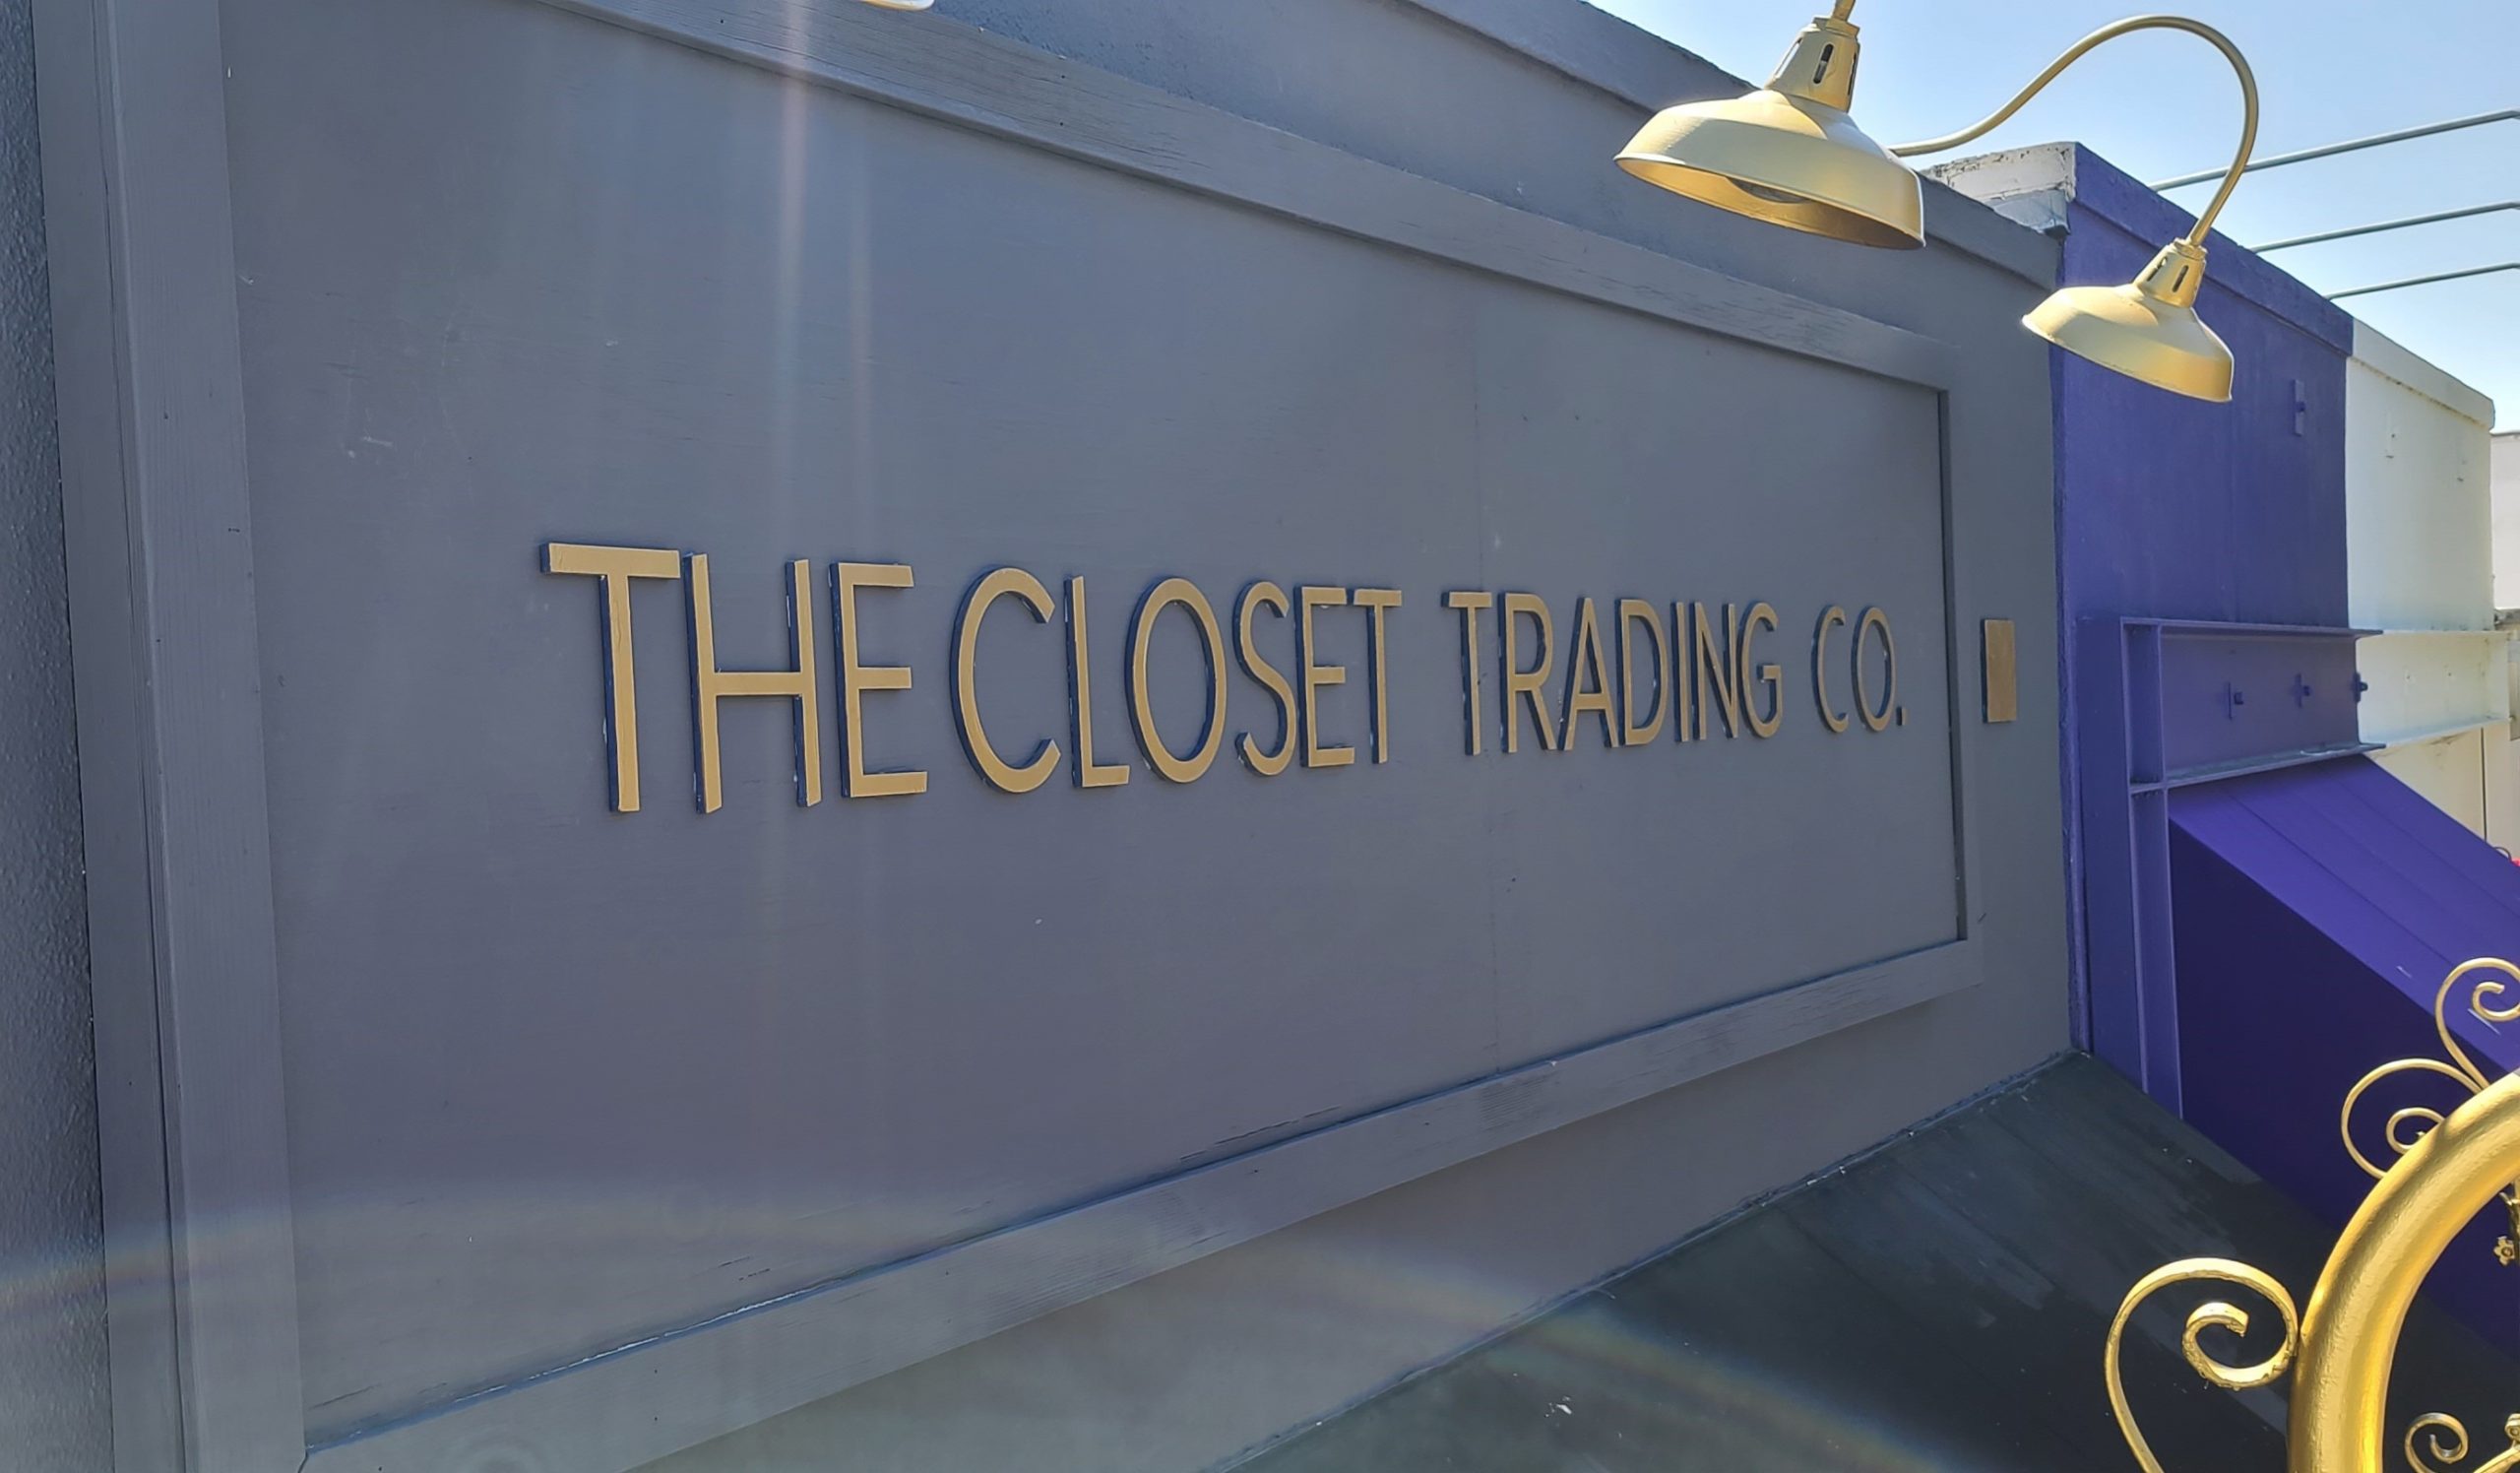 You are currently viewing Dimensional Letters Boutique Sign for The Closet Trading Company in Santa Monica